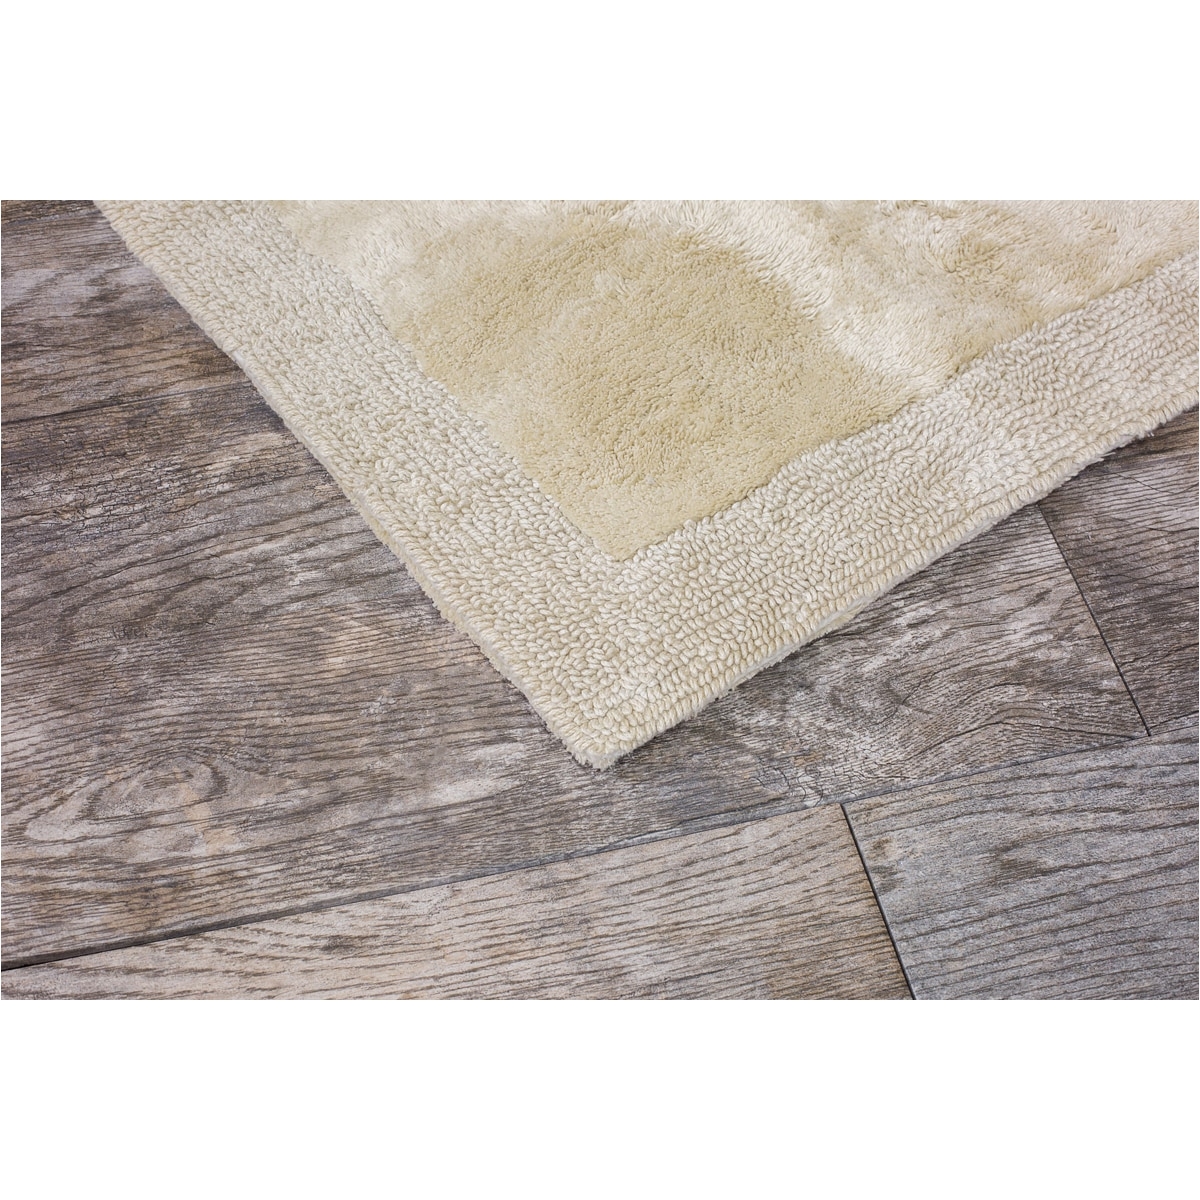 shop grund america certified organic cotton reversible bath rug puro series free shipping on orders over 45 overstock com 10238402